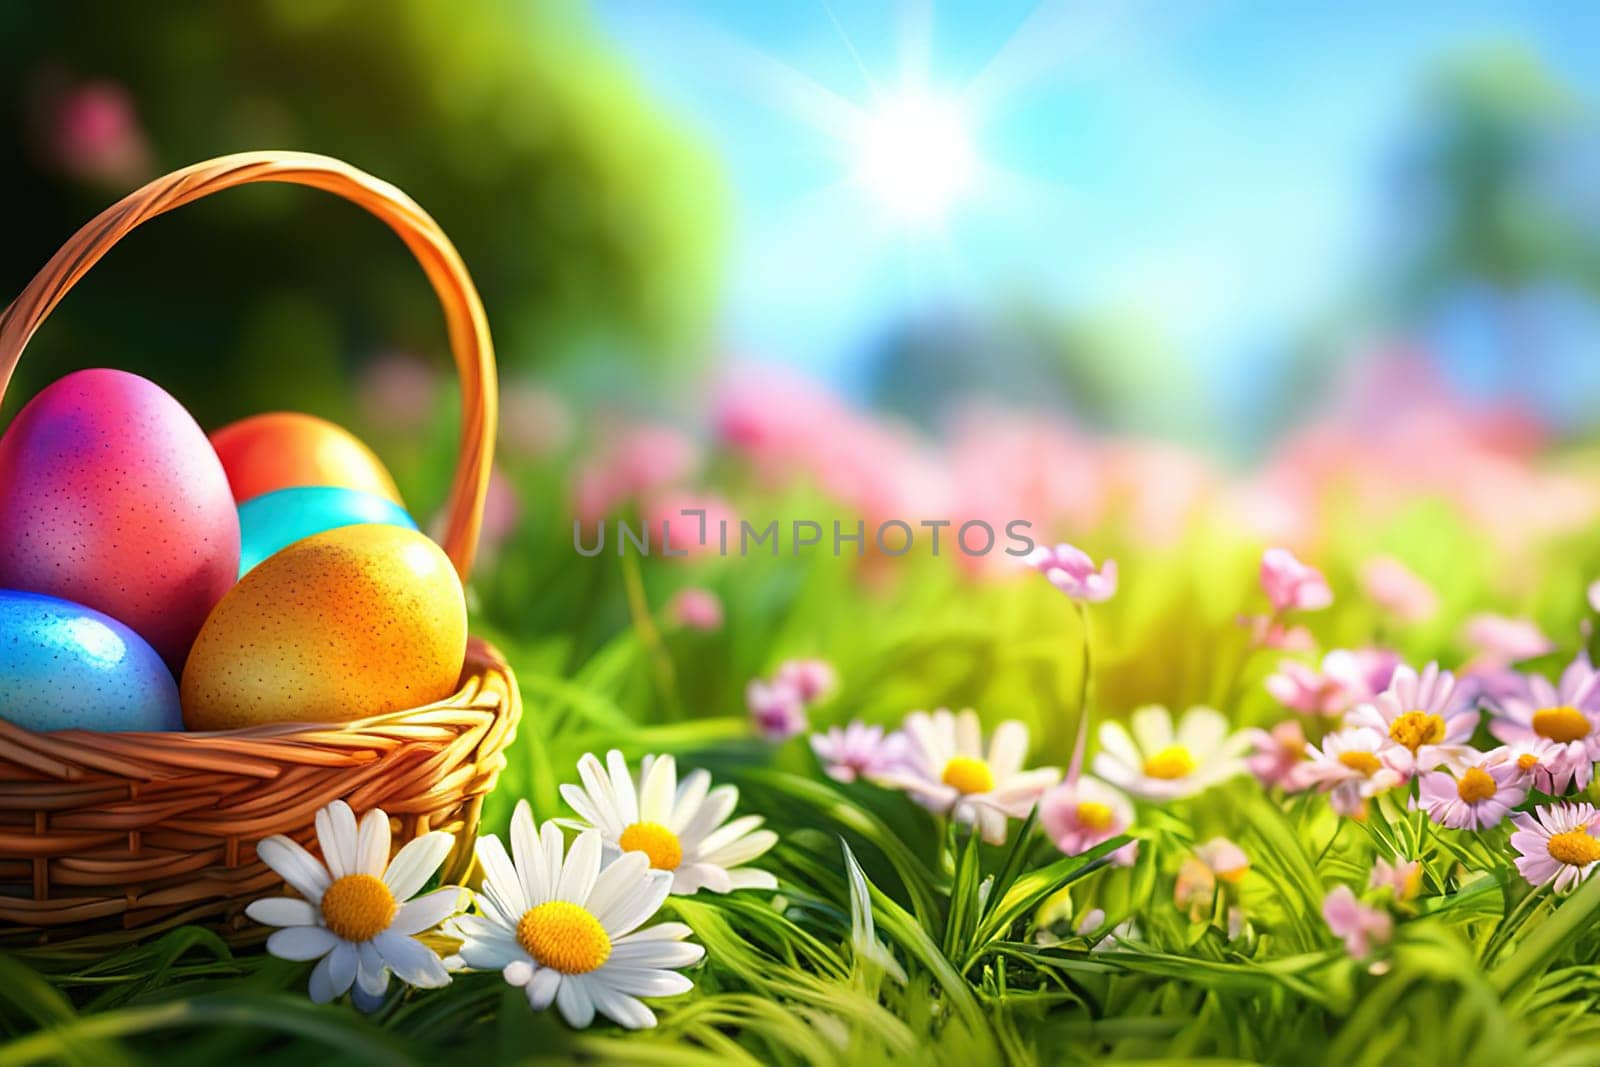 Close-up of easter eggs on grassy field with flowers in a sunny garden. by EkaterinaPereslavtseva